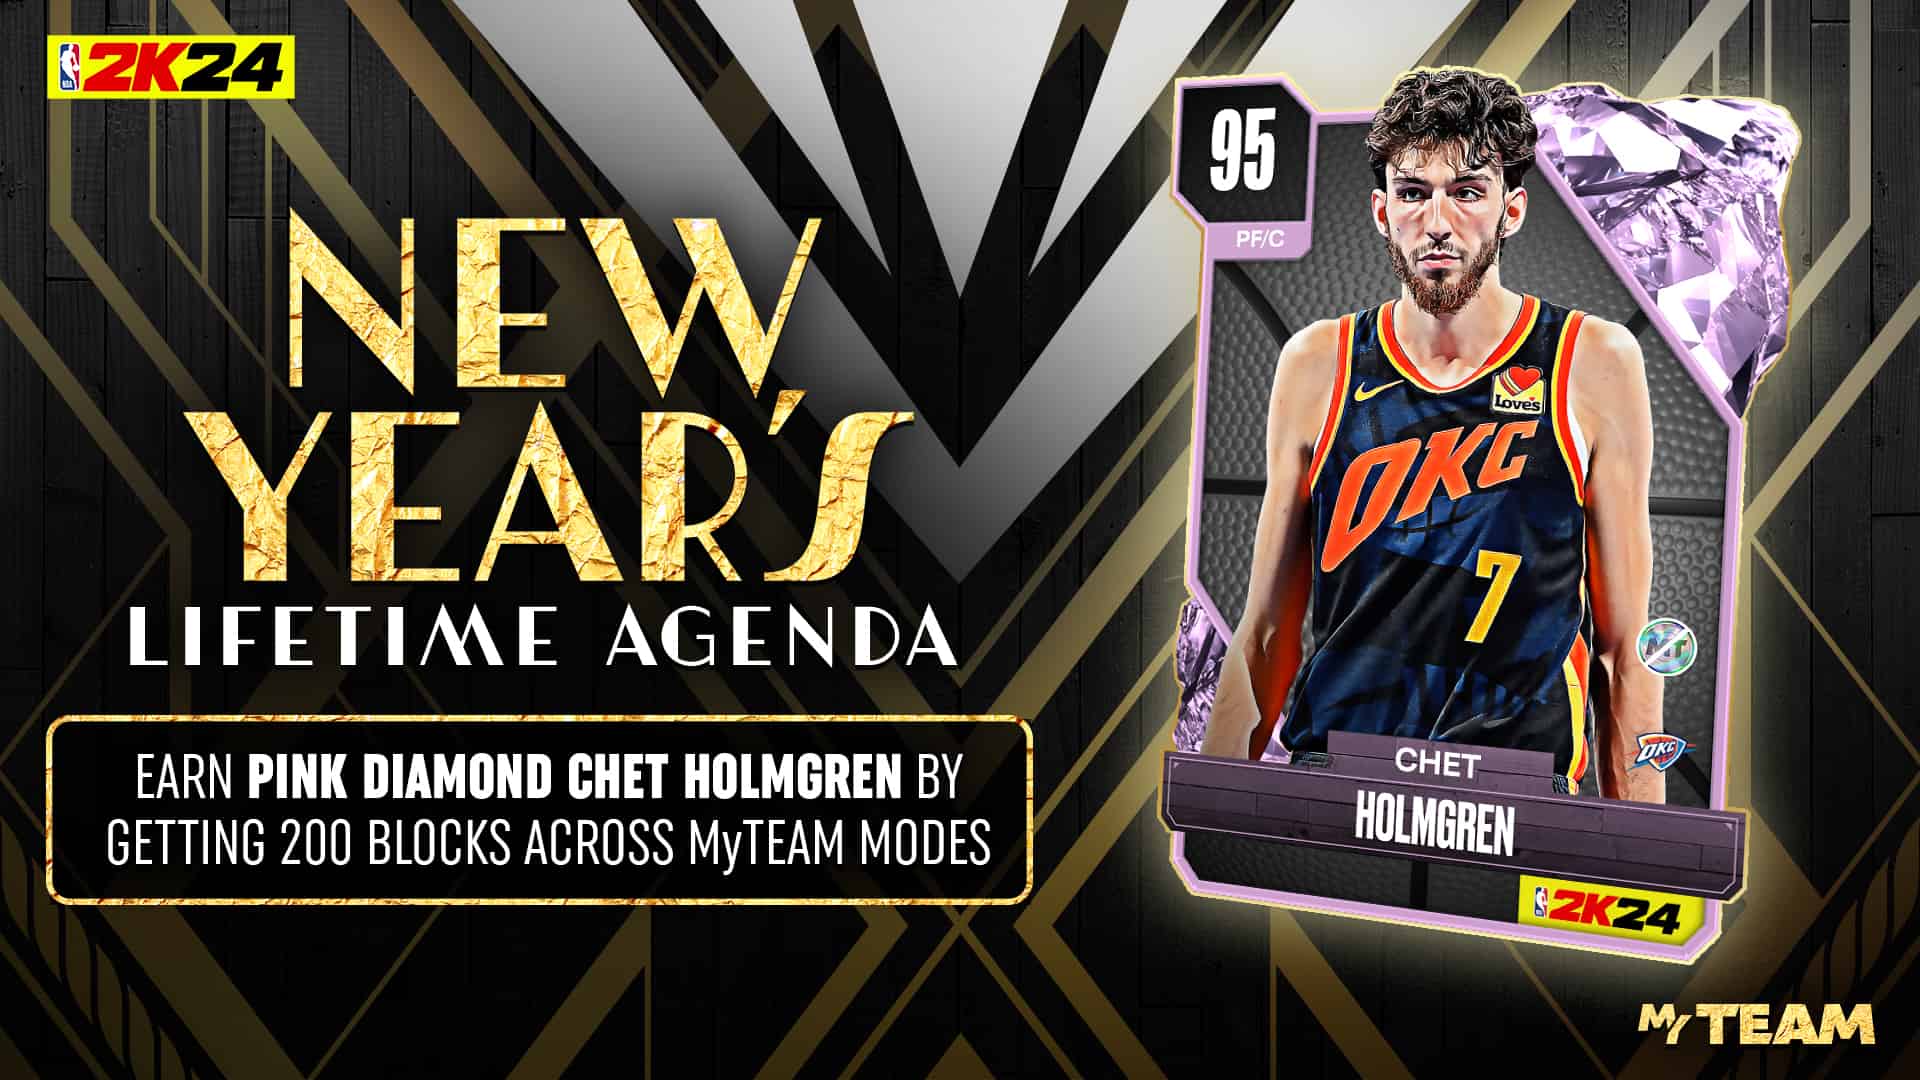 NBA New Year's Eve agenda featuring Chet Holmgren and a free 95 OVR MyTEAM card acquisition guide.